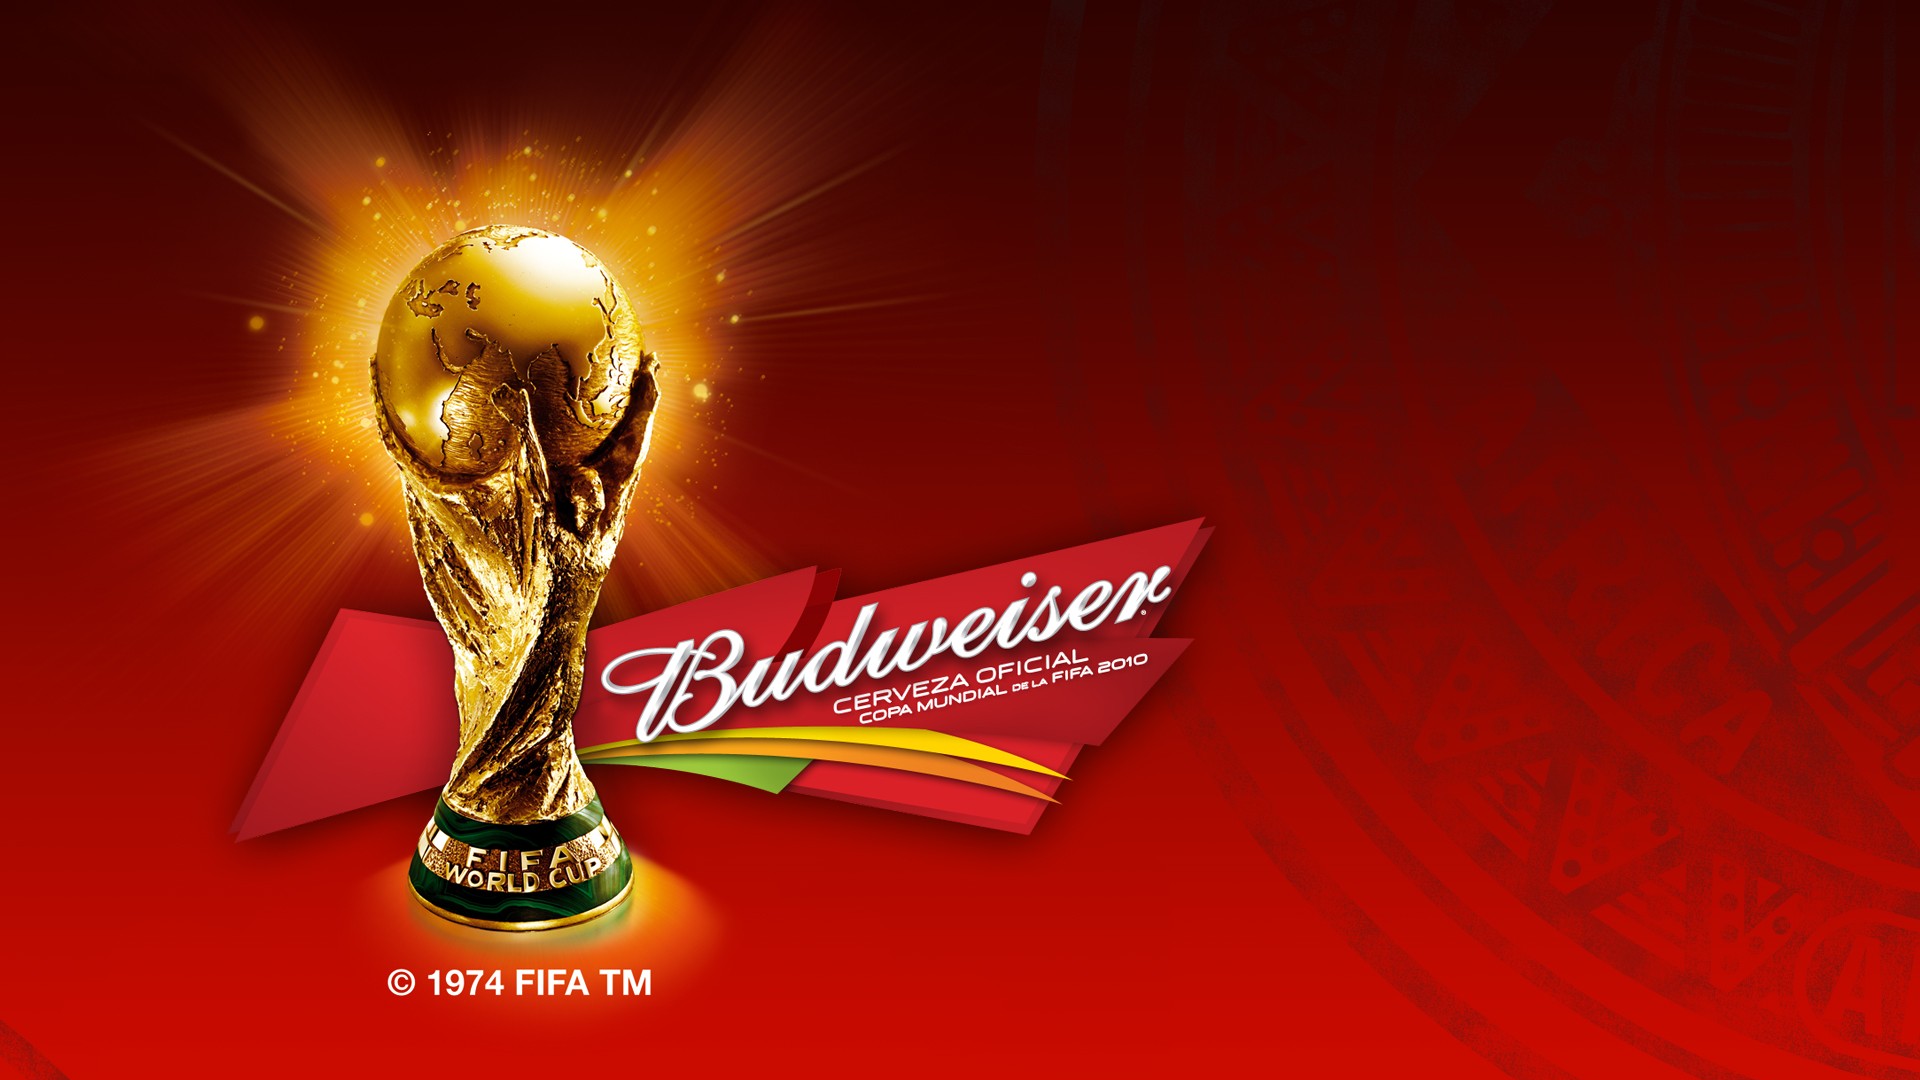 Fifa World Cup Budweiser HD Image Brands Ads Beer